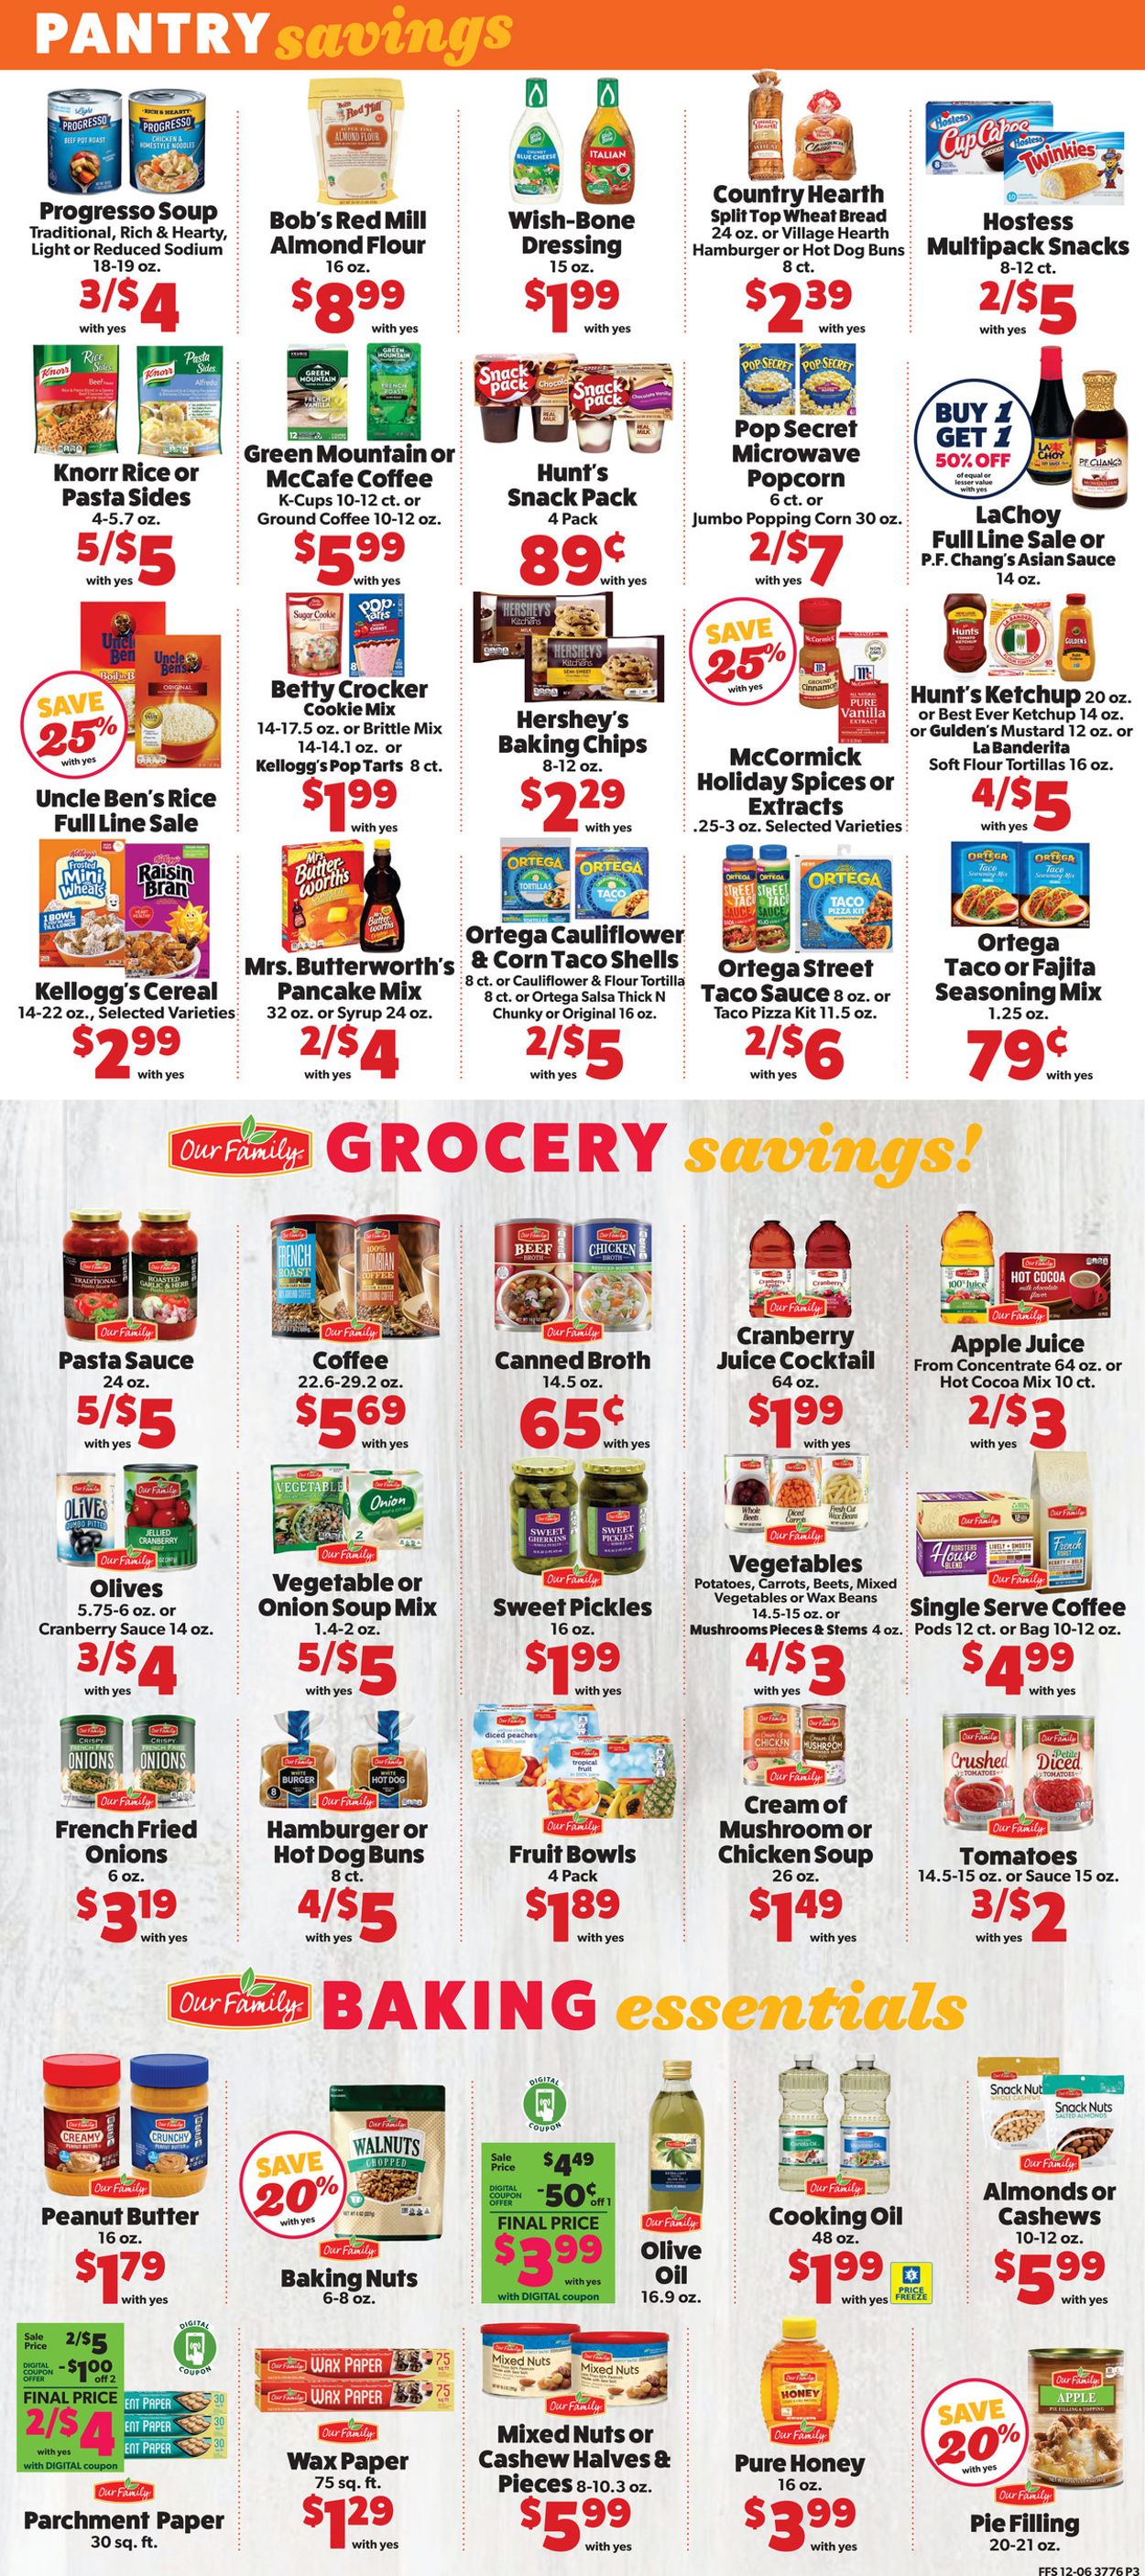 Family Fare Ad from 12/09/2020